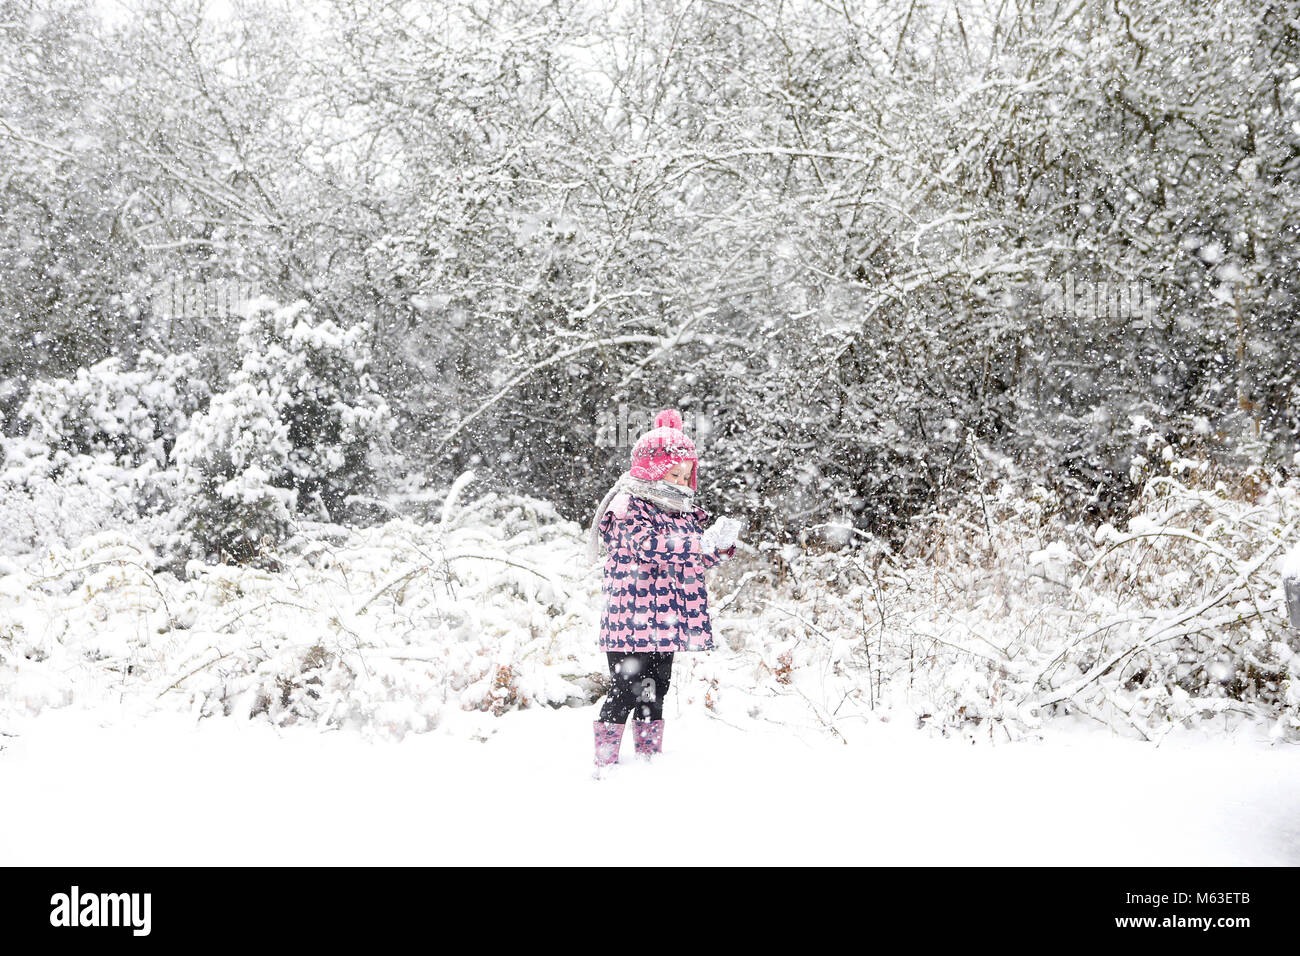 Cambridge, UK. 28th February 2018. Ivy Mitchell 2 1/2 years old plays in the snow near Cambridge, UK. Credit: Jason Mitchell/Alamy Live News. Stock Photo